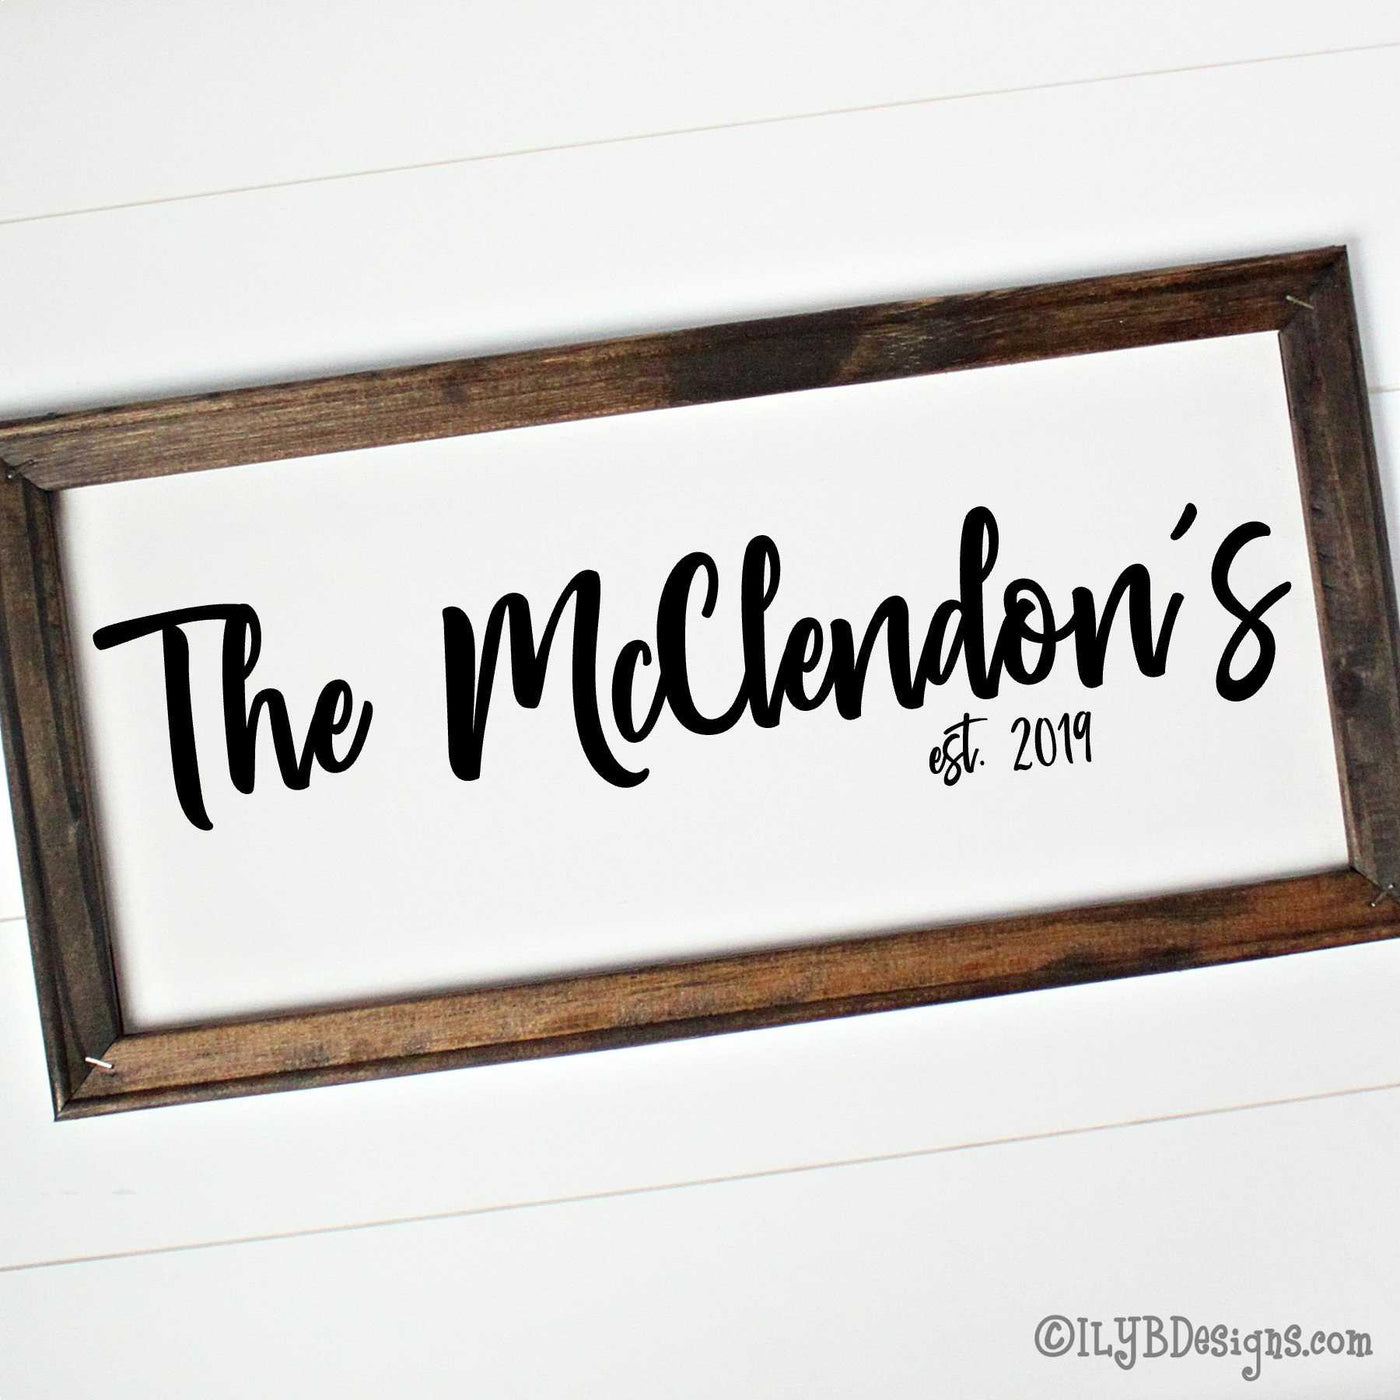 Dark walnut stained frame on a white canvas with a black design. Design is placed horizontally on the 20"x10" sign. Family name is in a bold script font with an established year underneath.